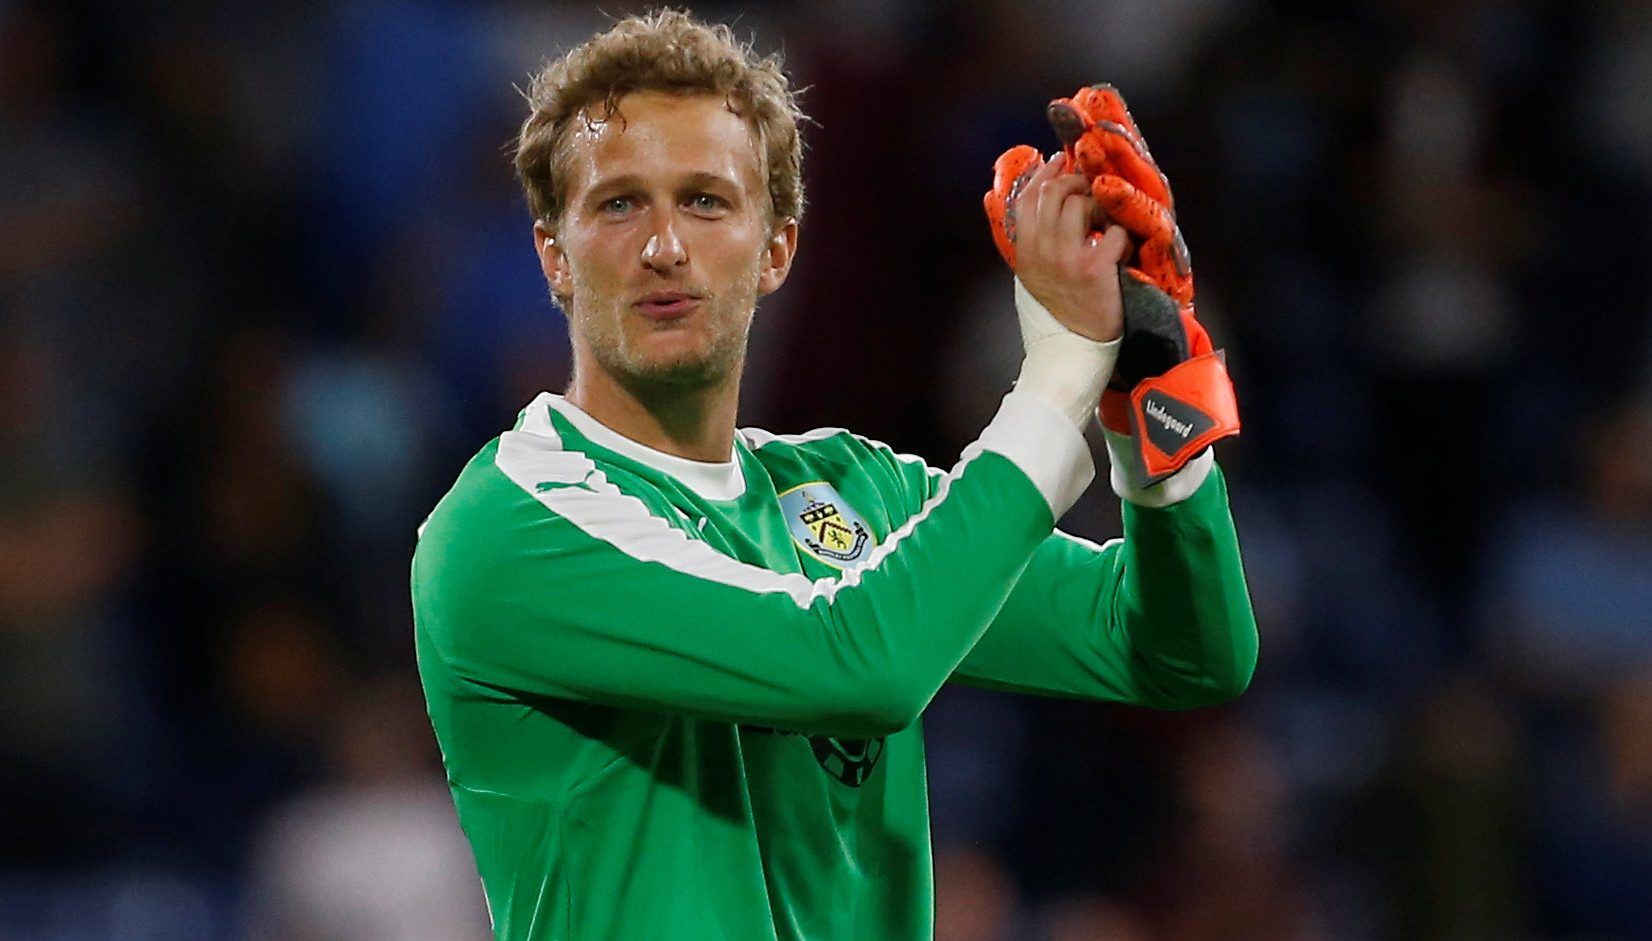 Soccer Football - Europa League - Second Qualifying Round Second Leg - Burnley v Aberdeen - Turf Moor, Burnley, Britain - August 2, 2018   Burnley's Anders Lindegaard celebrates after the match   Action Images via Reuters/Craig Brough